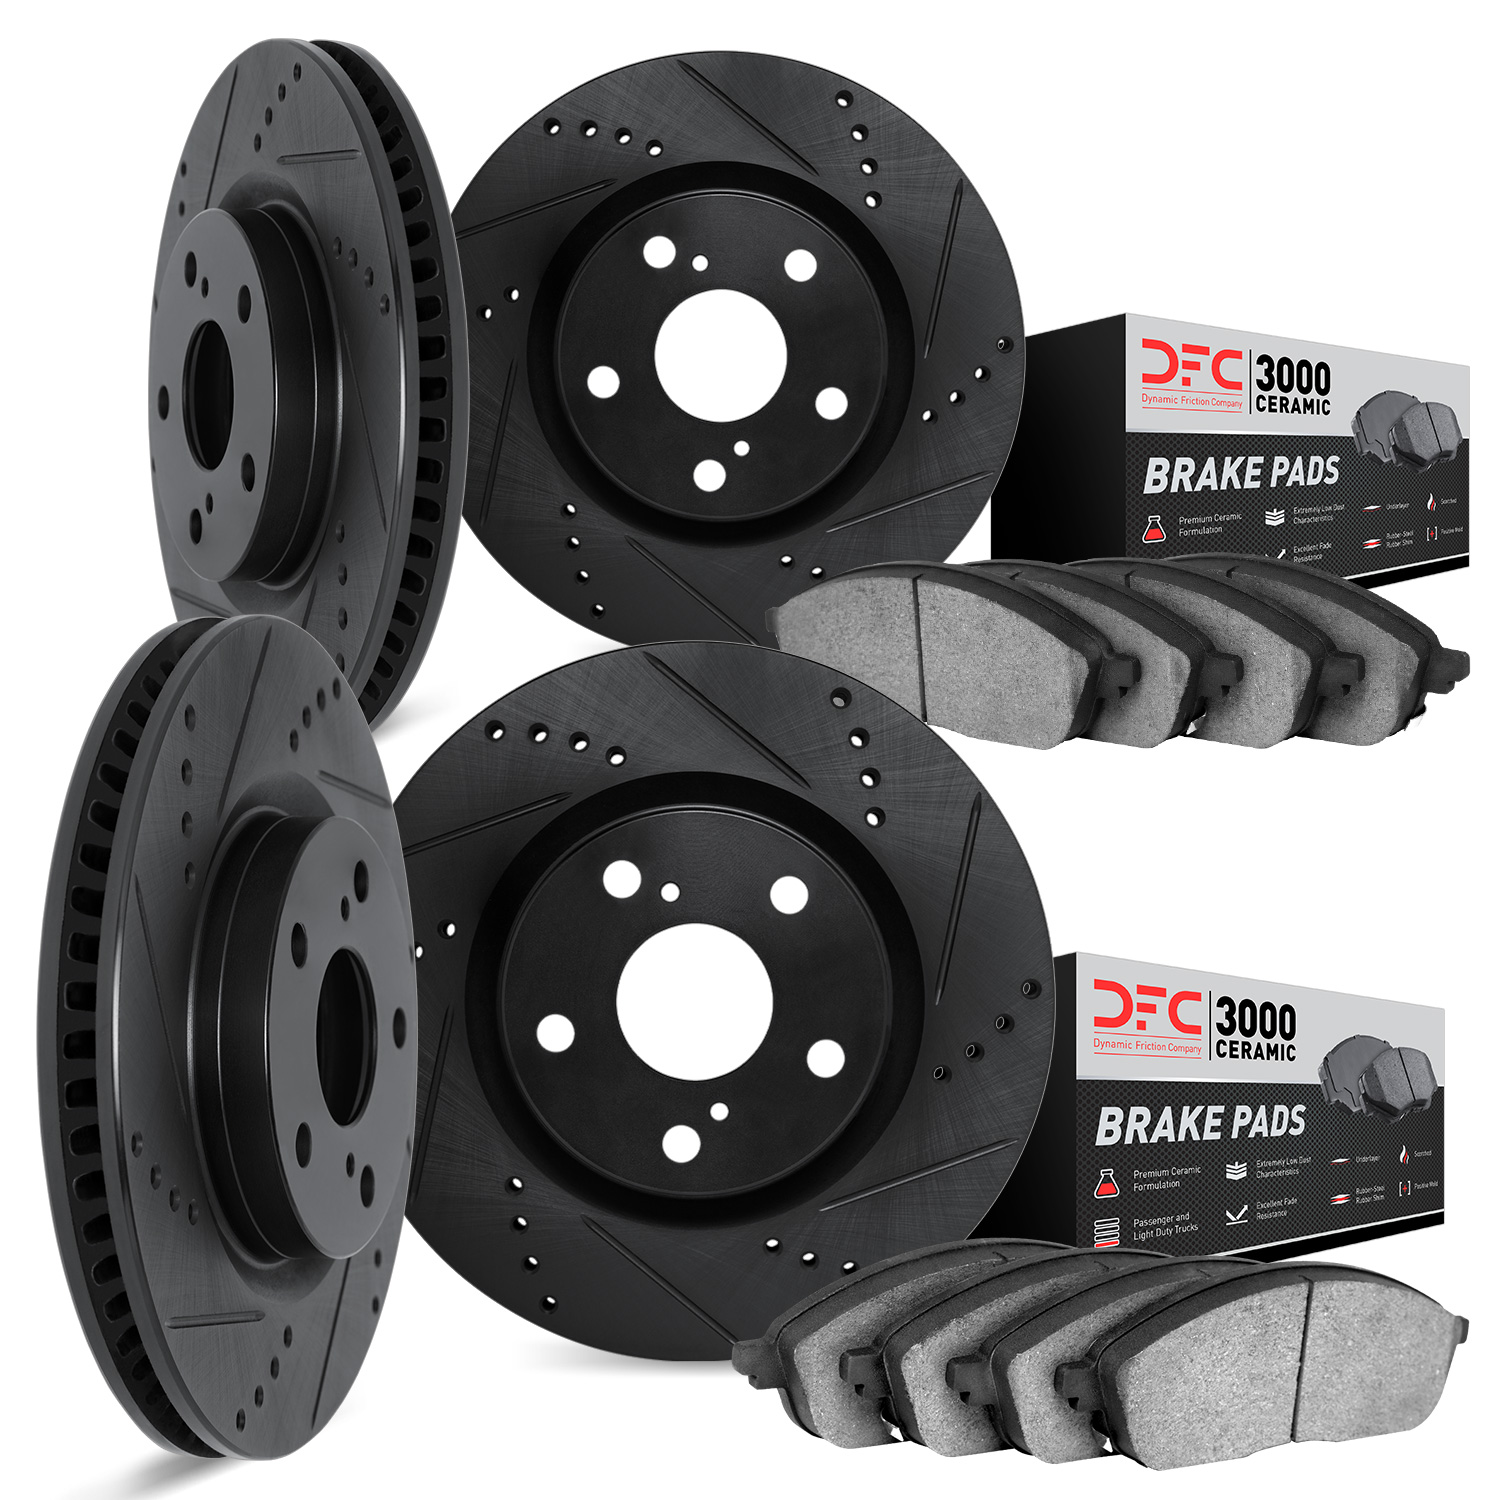 8304-42009 Drilled/Slotted Brake Rotors with 3000-Series Ceramic Brake Pads Kit [Black], 2006-2010 Mopar, Position: Front and Re